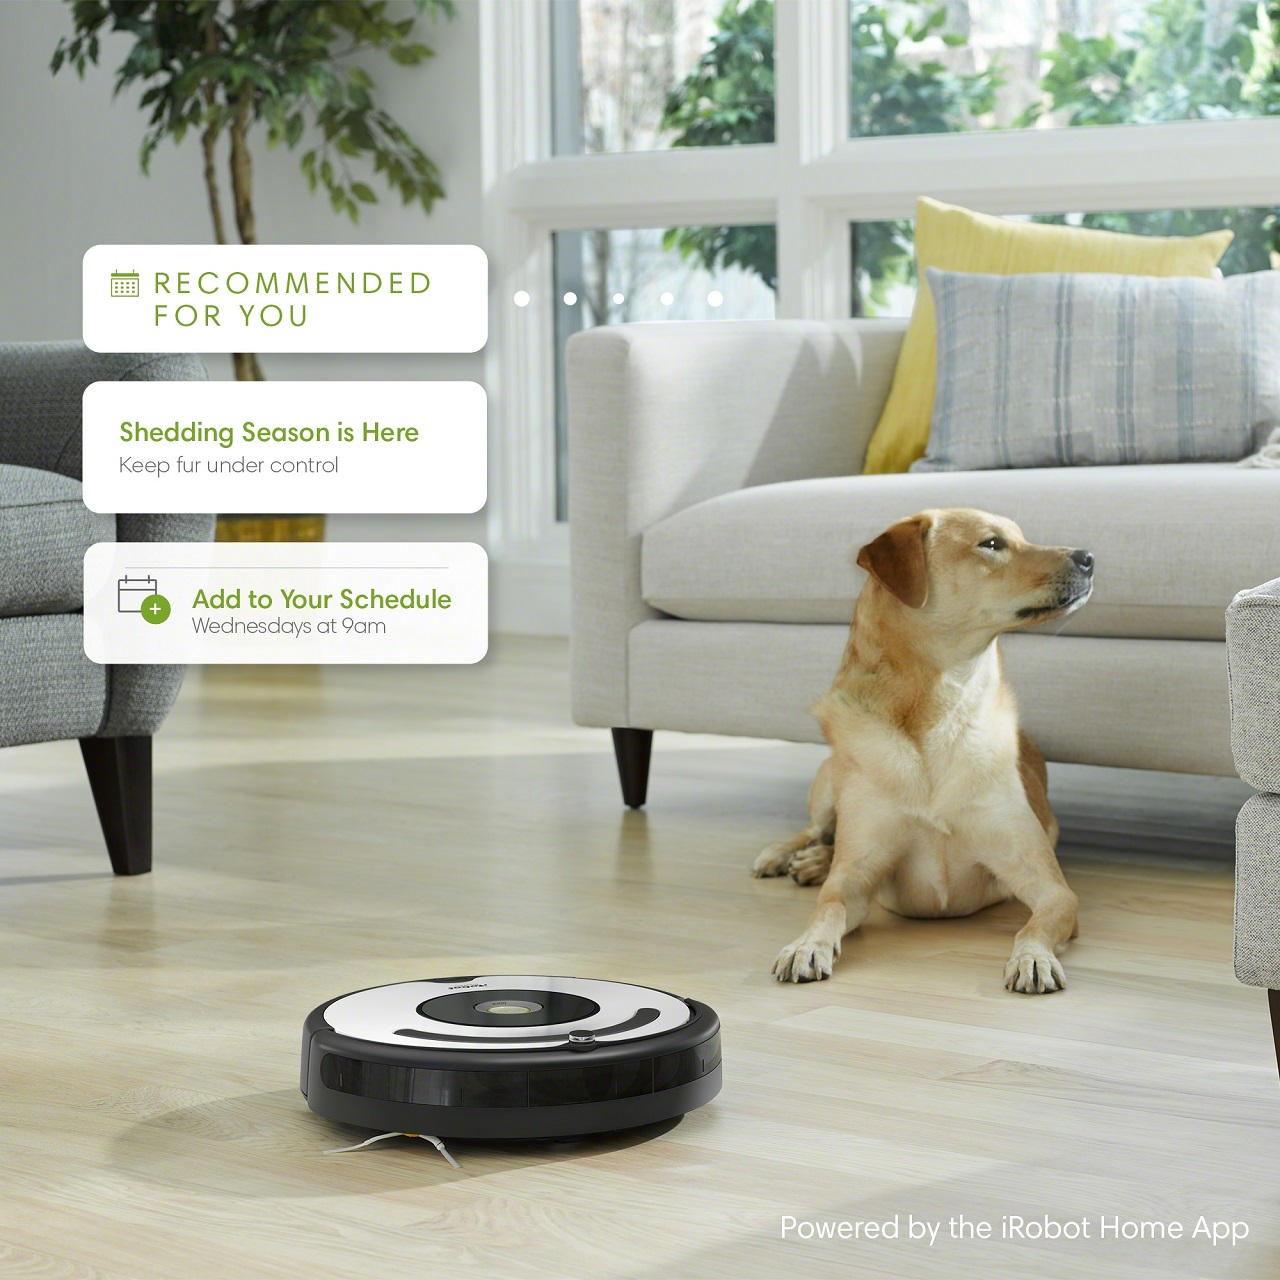 iRobot Roomba 670 Robot Vacuum-Wi-Fi Connectivity, Works with Google Home, Good for Pet Hair, Carpets, Hard Floors, Self-Charging - image 5 of 12